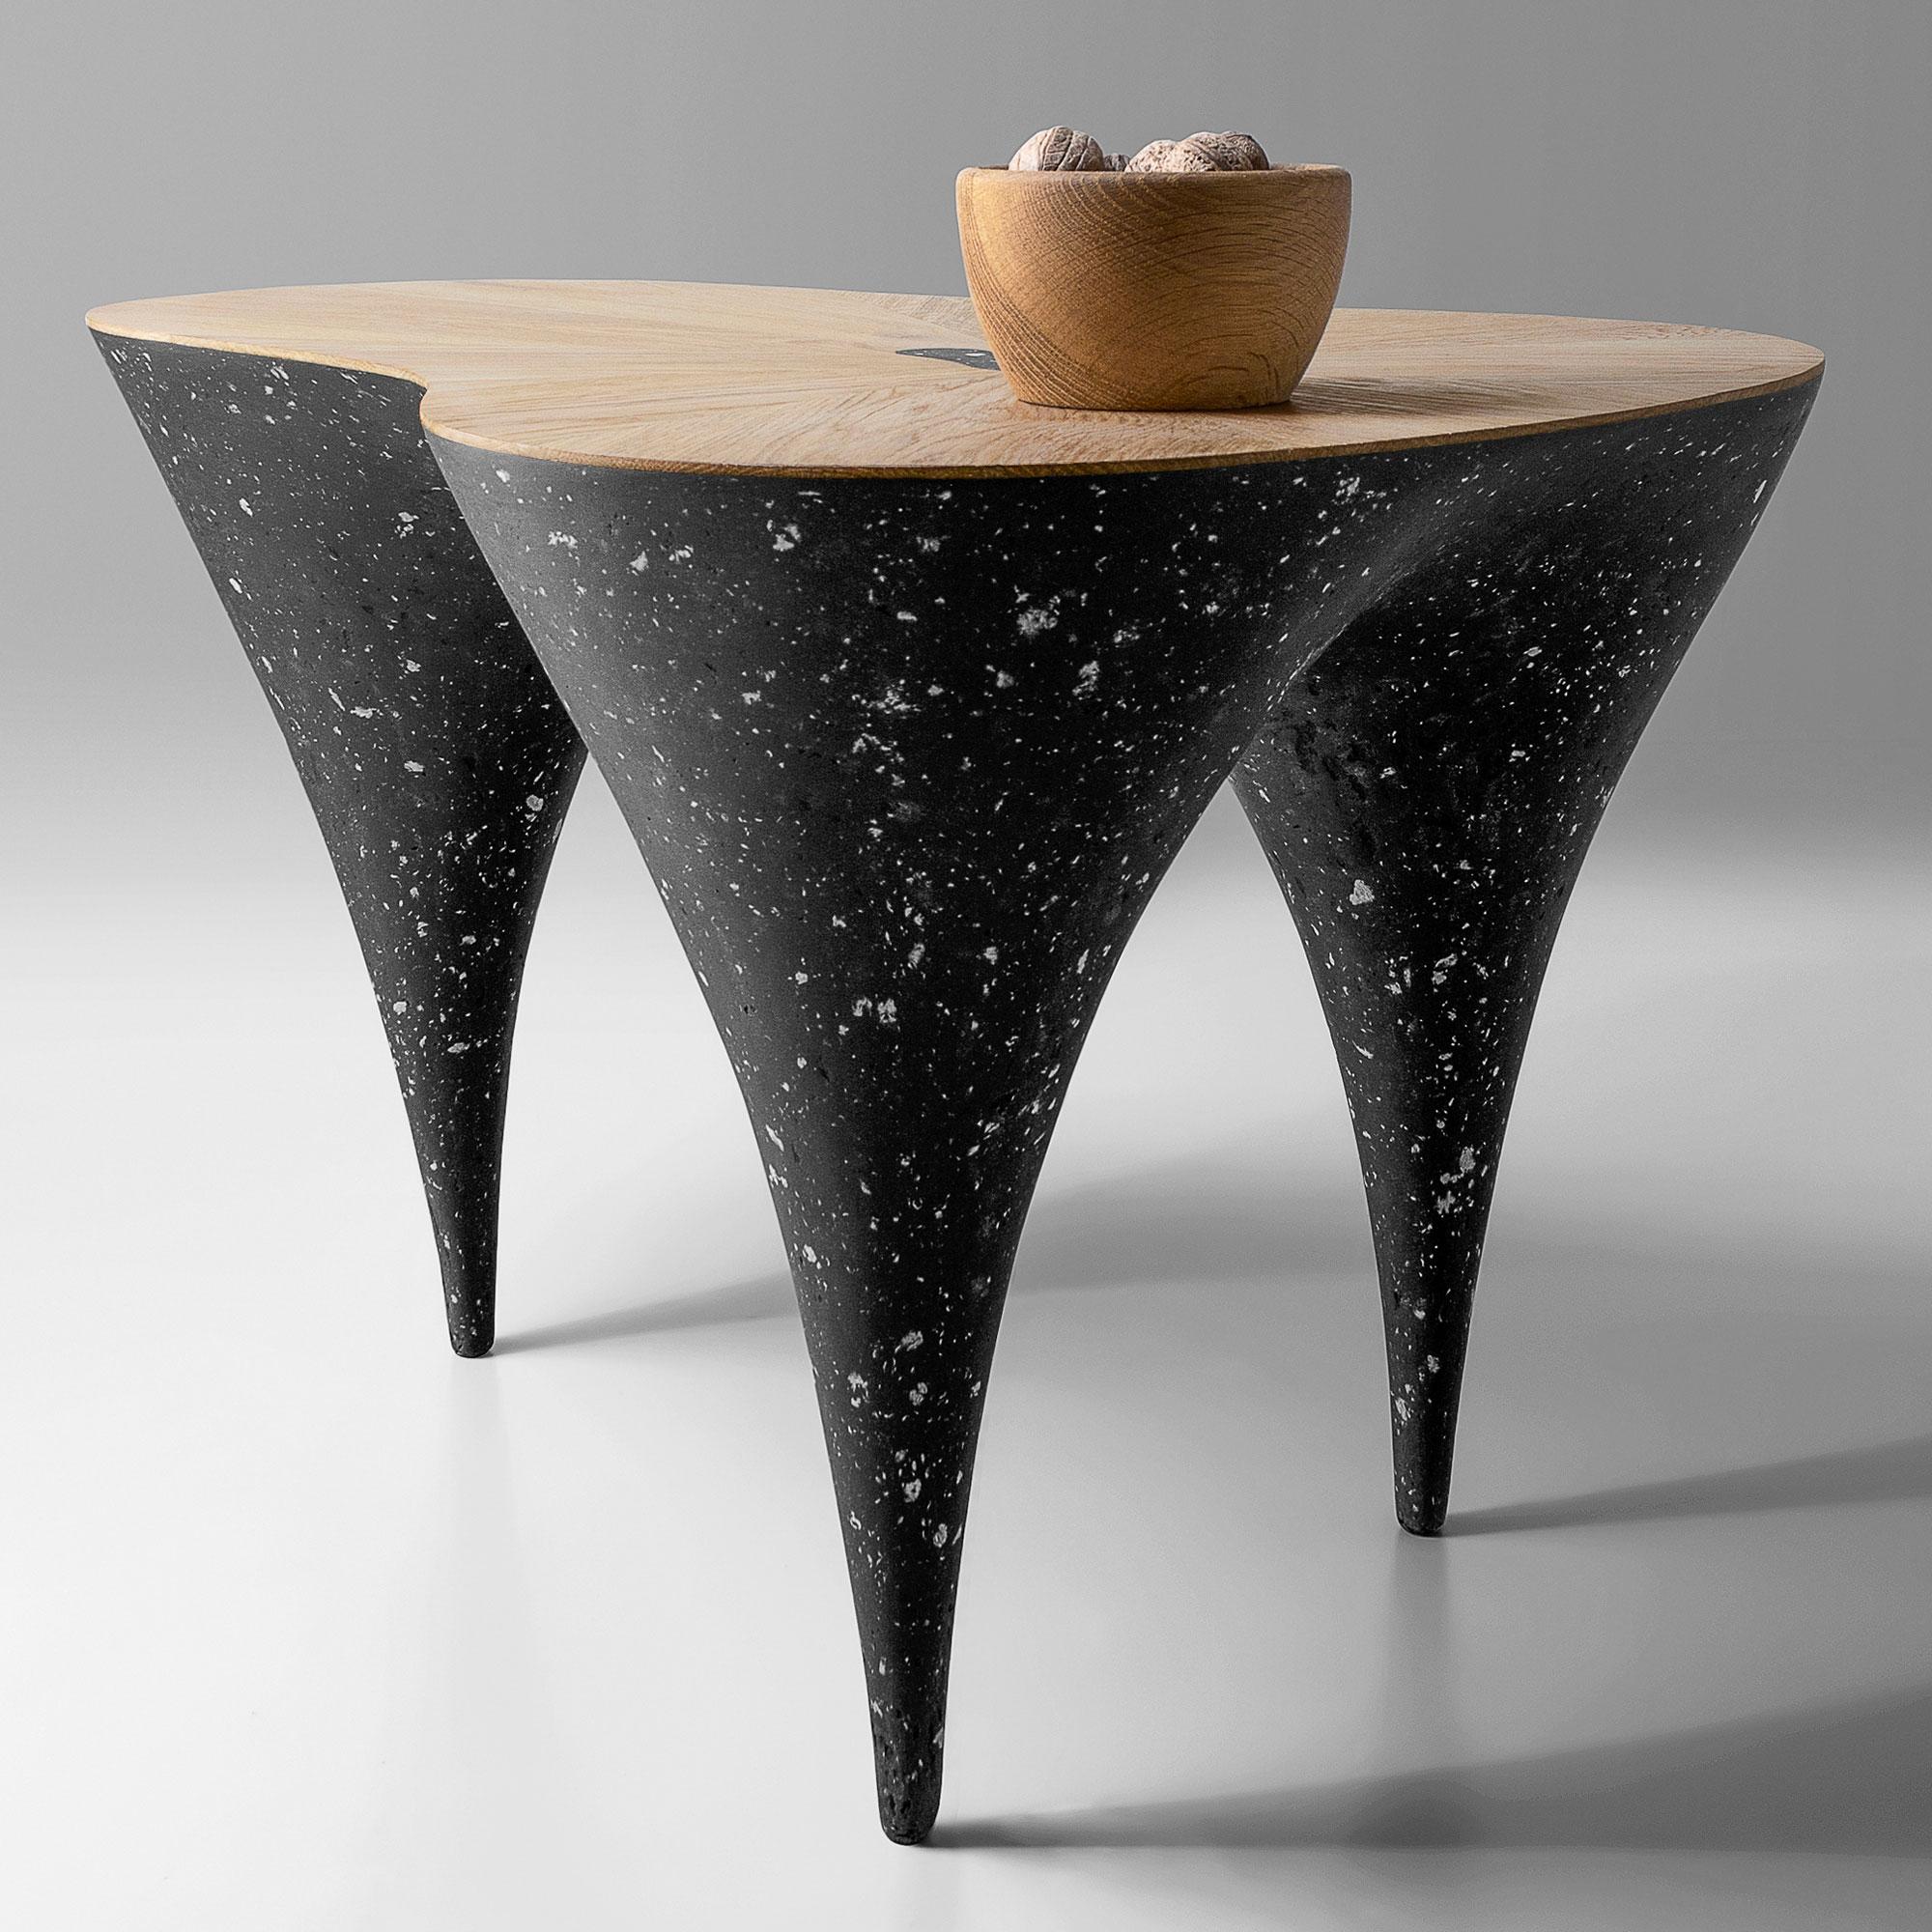 Contemporary Curved Coffee Table, Oak, Black Concrete by Donatas Žukauskas In New Condition For Sale In Rudamina, LT